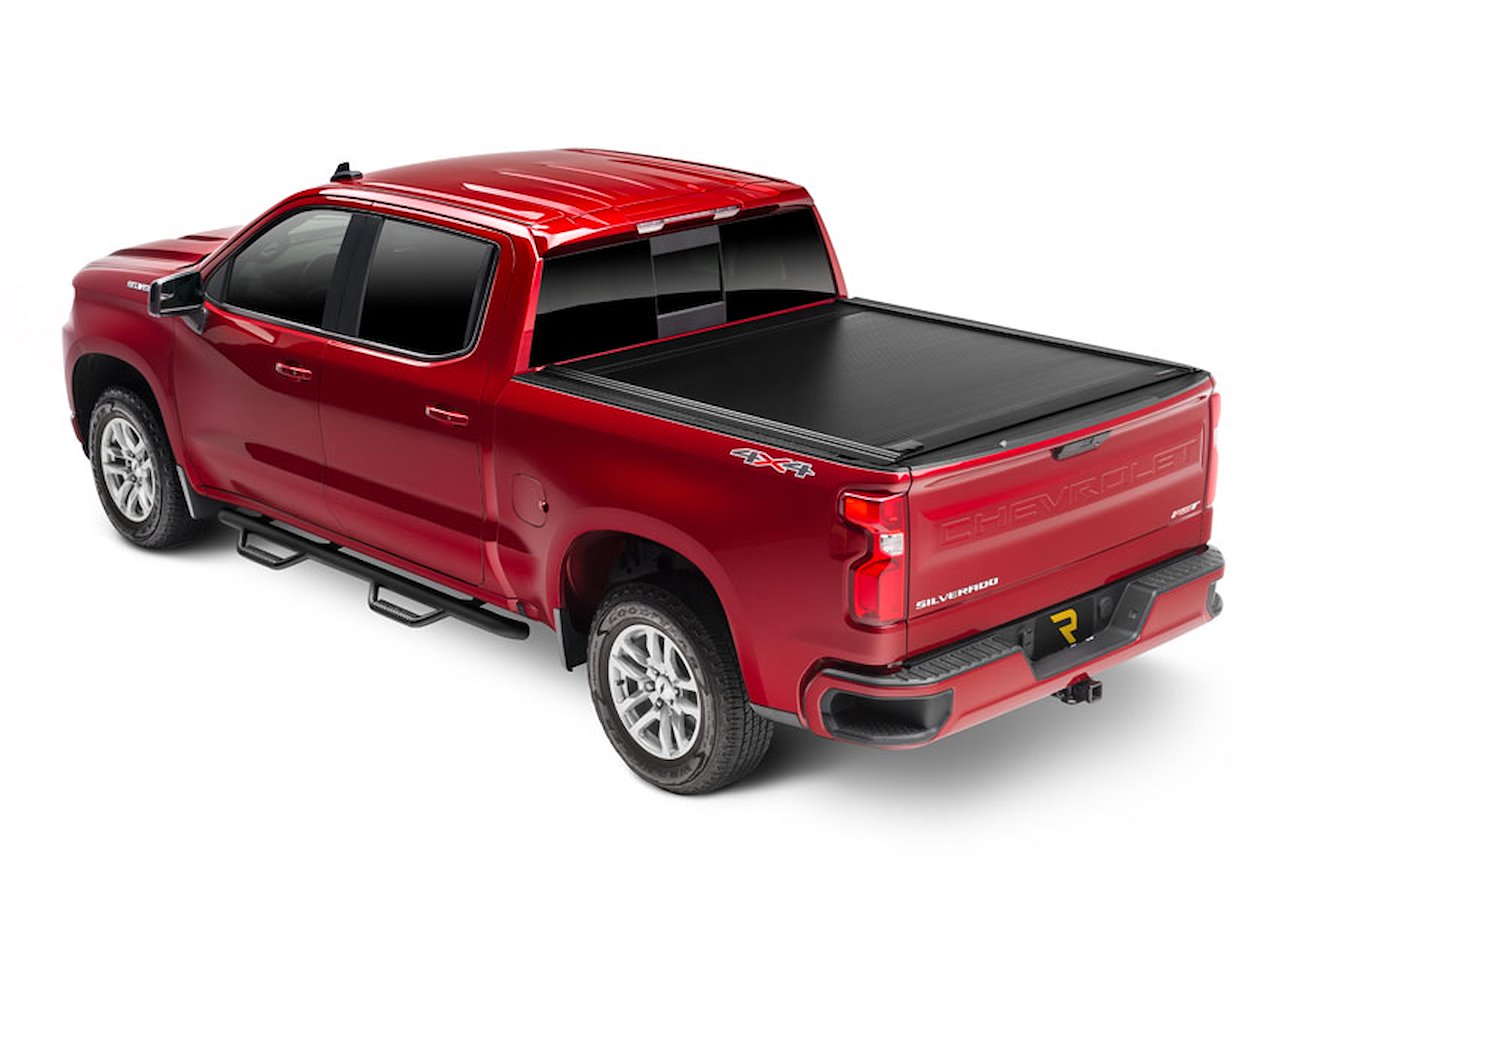 60482 RetraxOne MX Retractable Tonneau Cover Fits Select Chevy Silverado/GMC Sierra 1500 6' 7" Bed without Stake Pockets